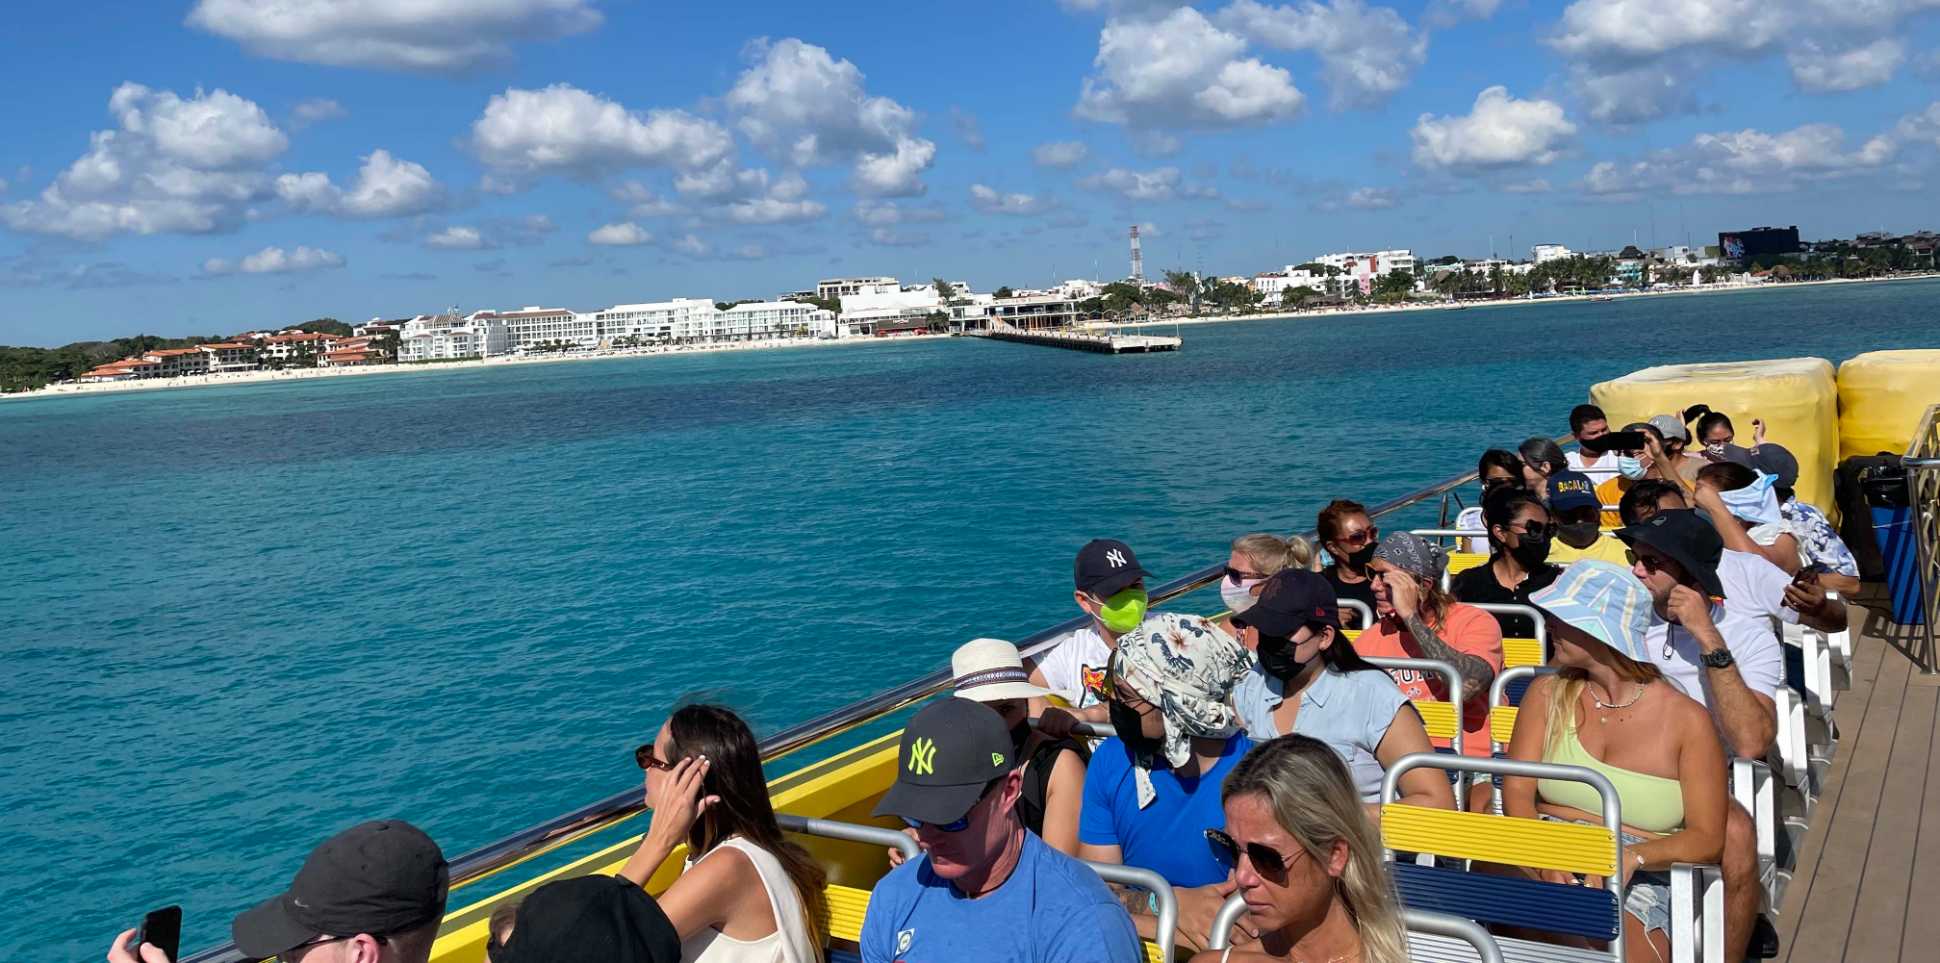 people on rooftop of ferry with Playa Del Carmen in background